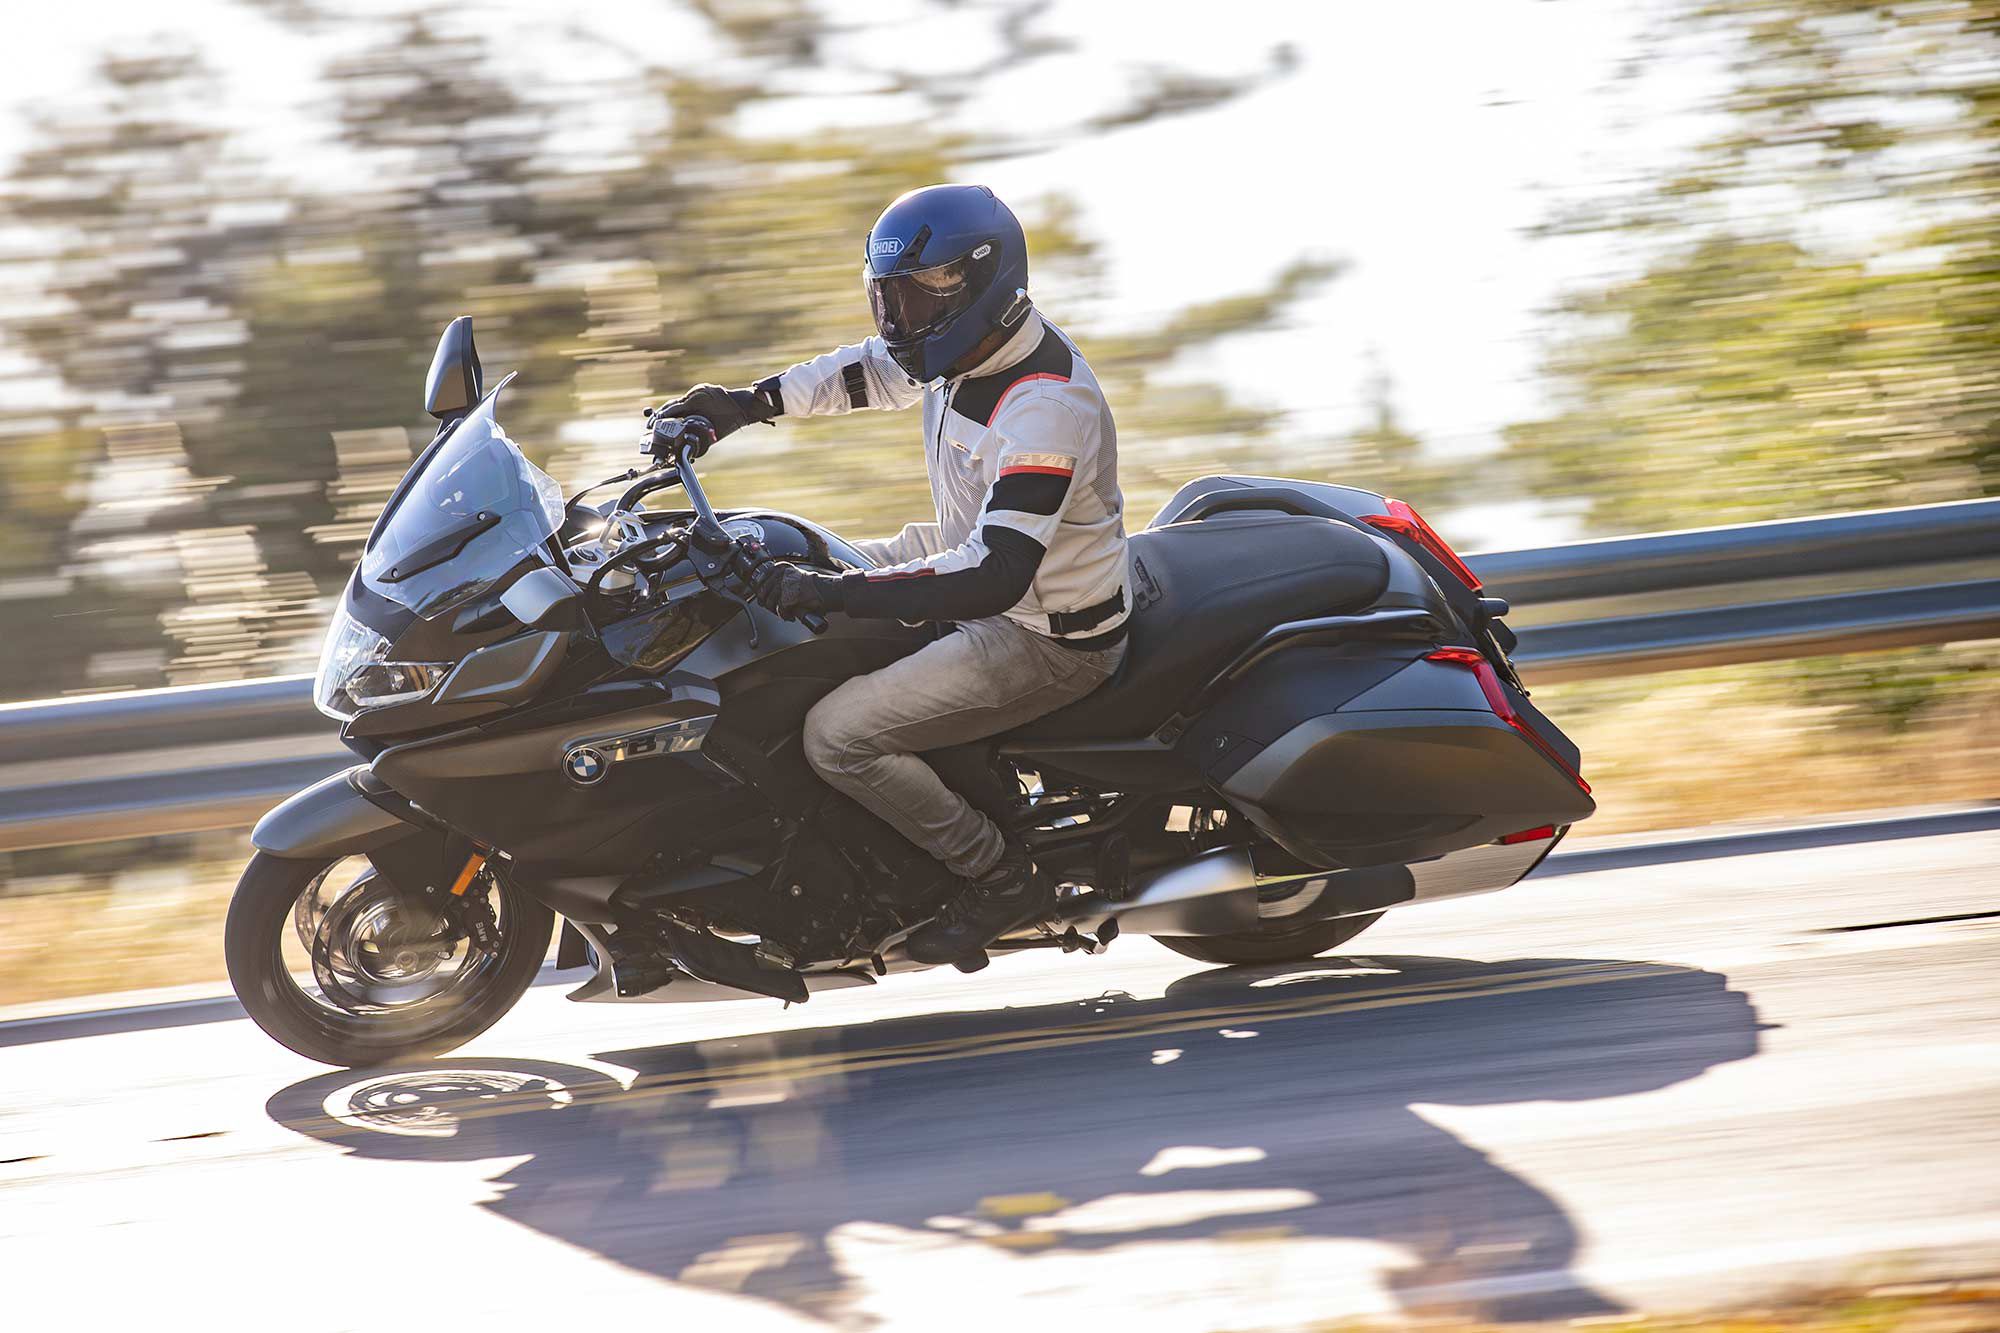 More sport-inclined riders will appreciate the sharper, more traditional chassis response of BMW’s K 1600 B versus bikes like Honda’s Gold Wing.